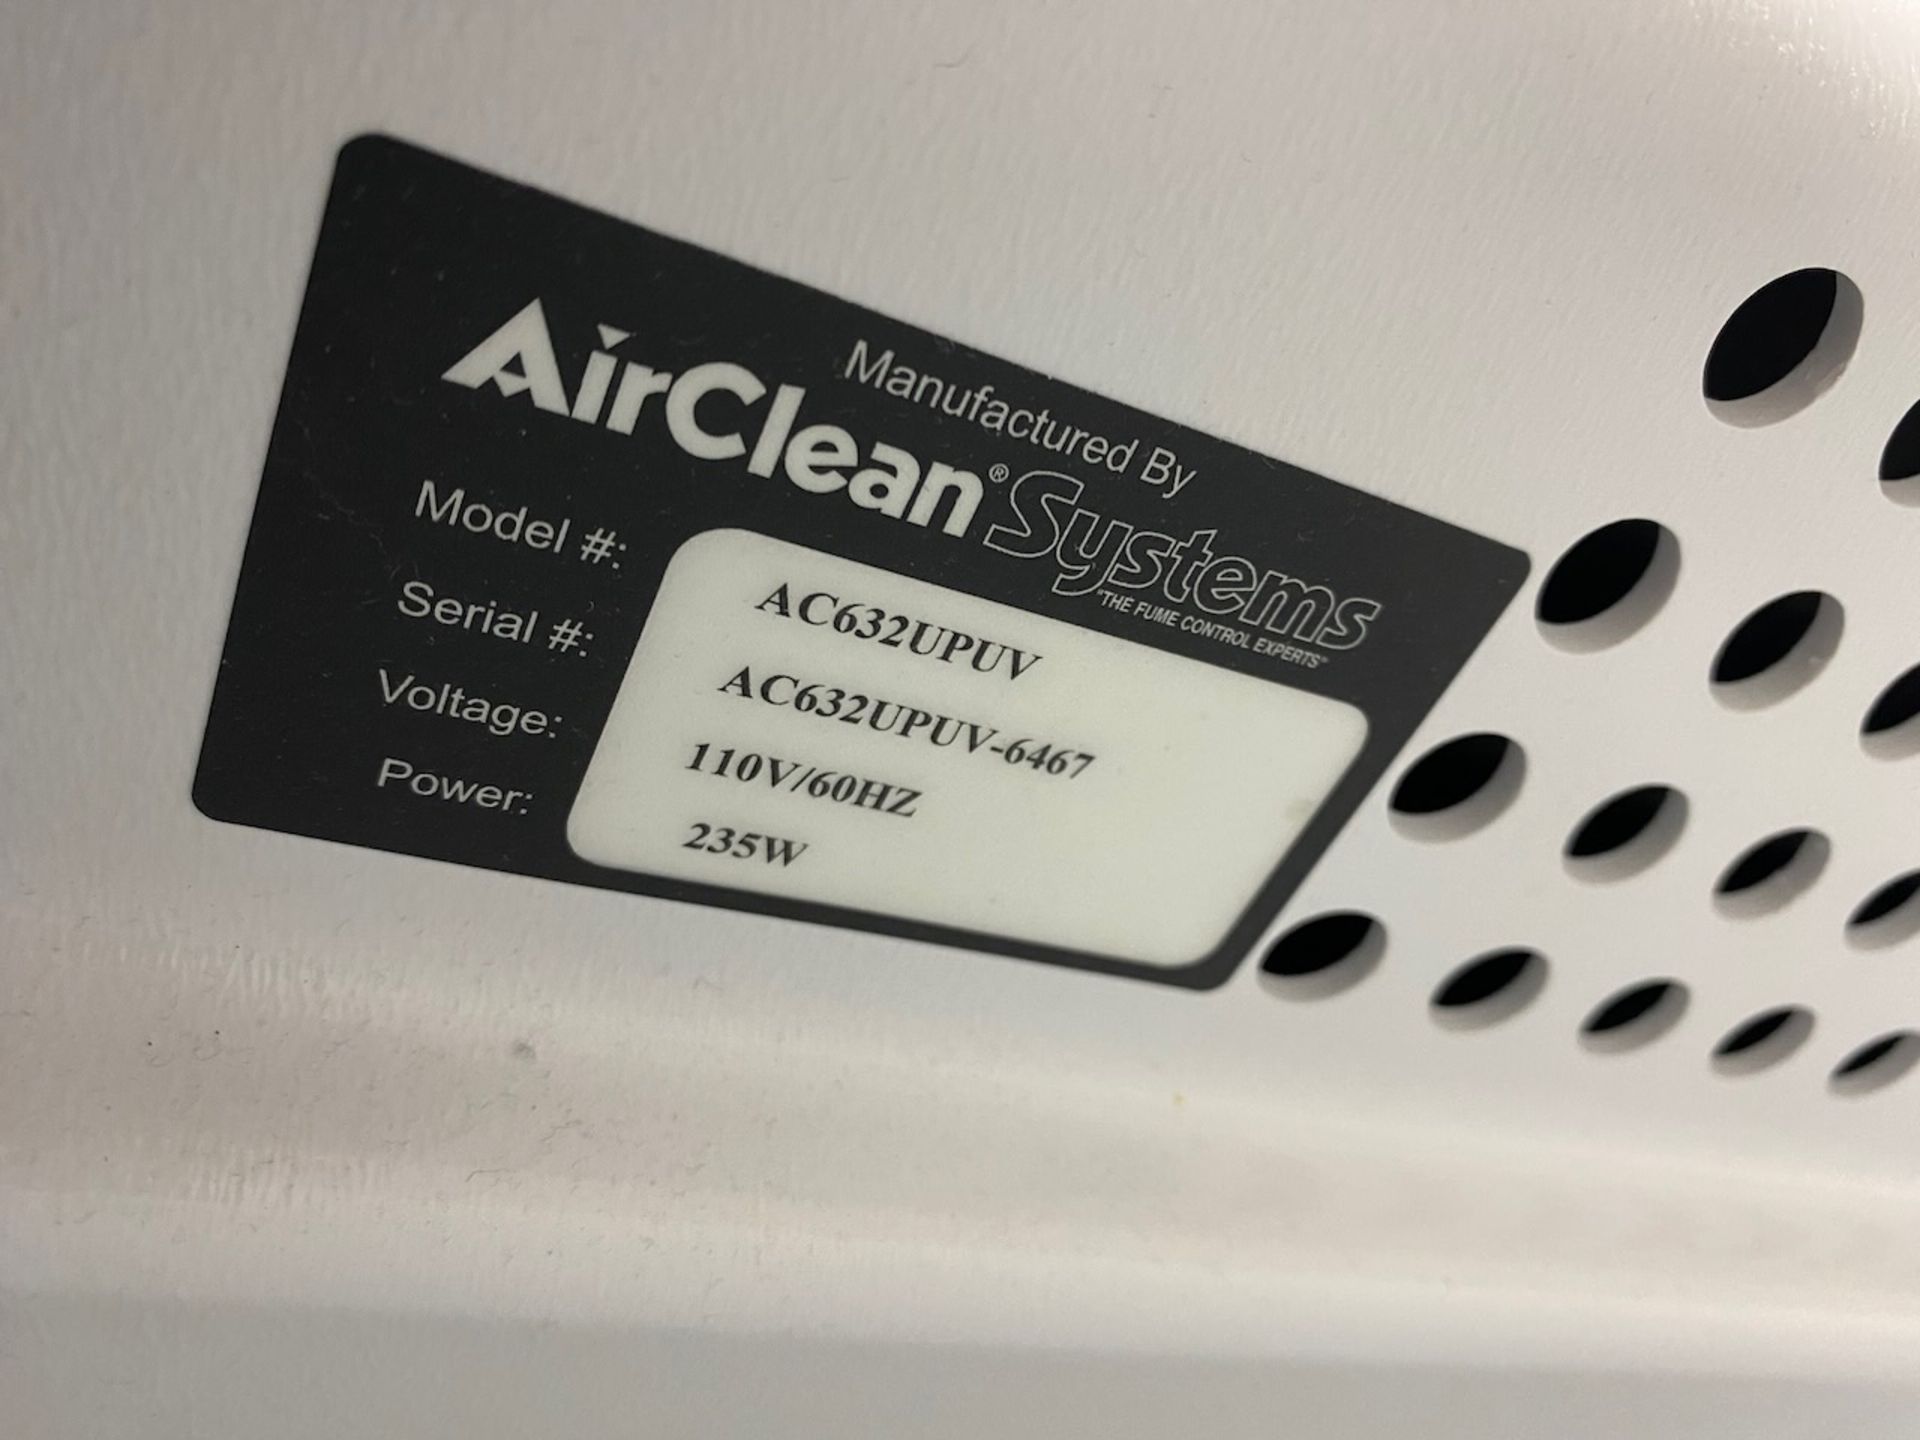 Airclean 600 Workstation - Image 3 of 3